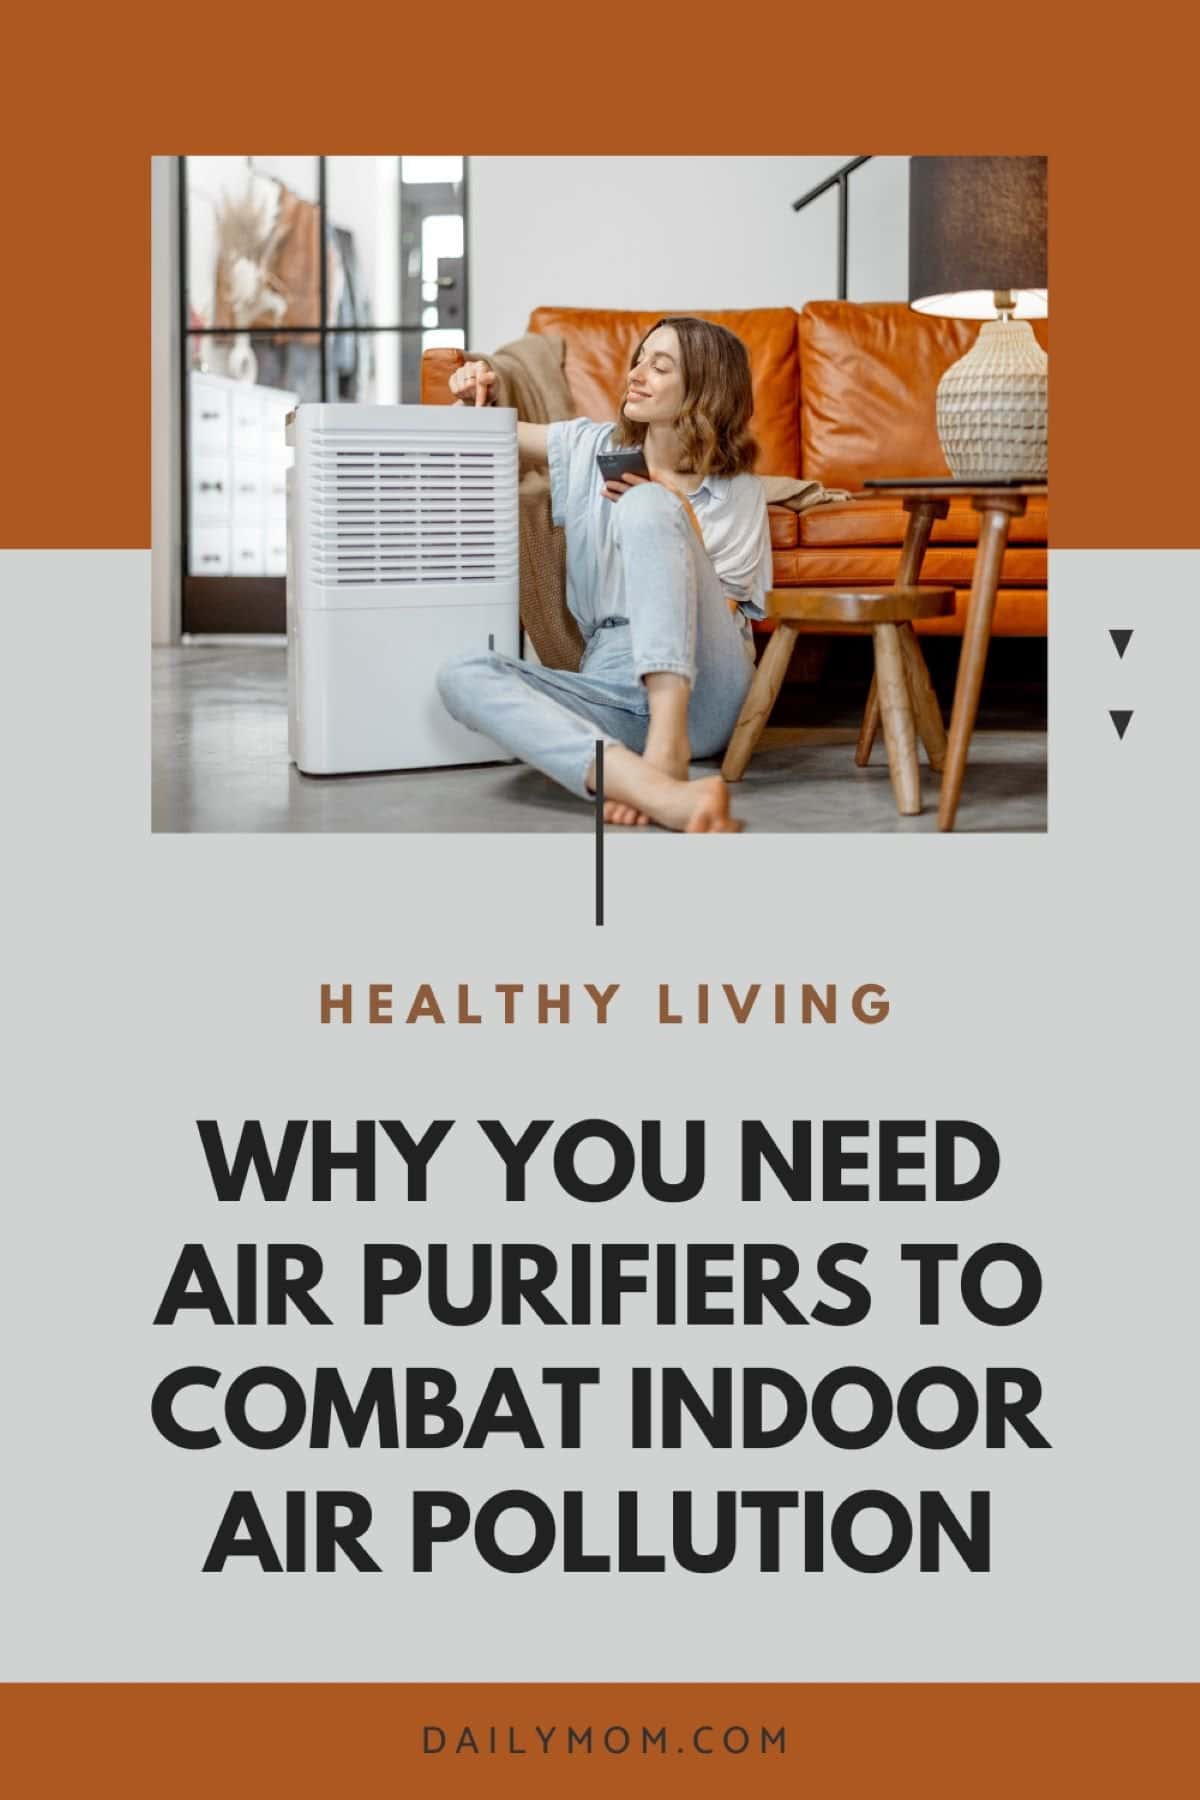 Understanding Indoor Air Quality: 3 Top Picks for Improving Indoor Air Quality and Sources of Indoor Air Pollutants 6 Daily Mom, Magazine for Families